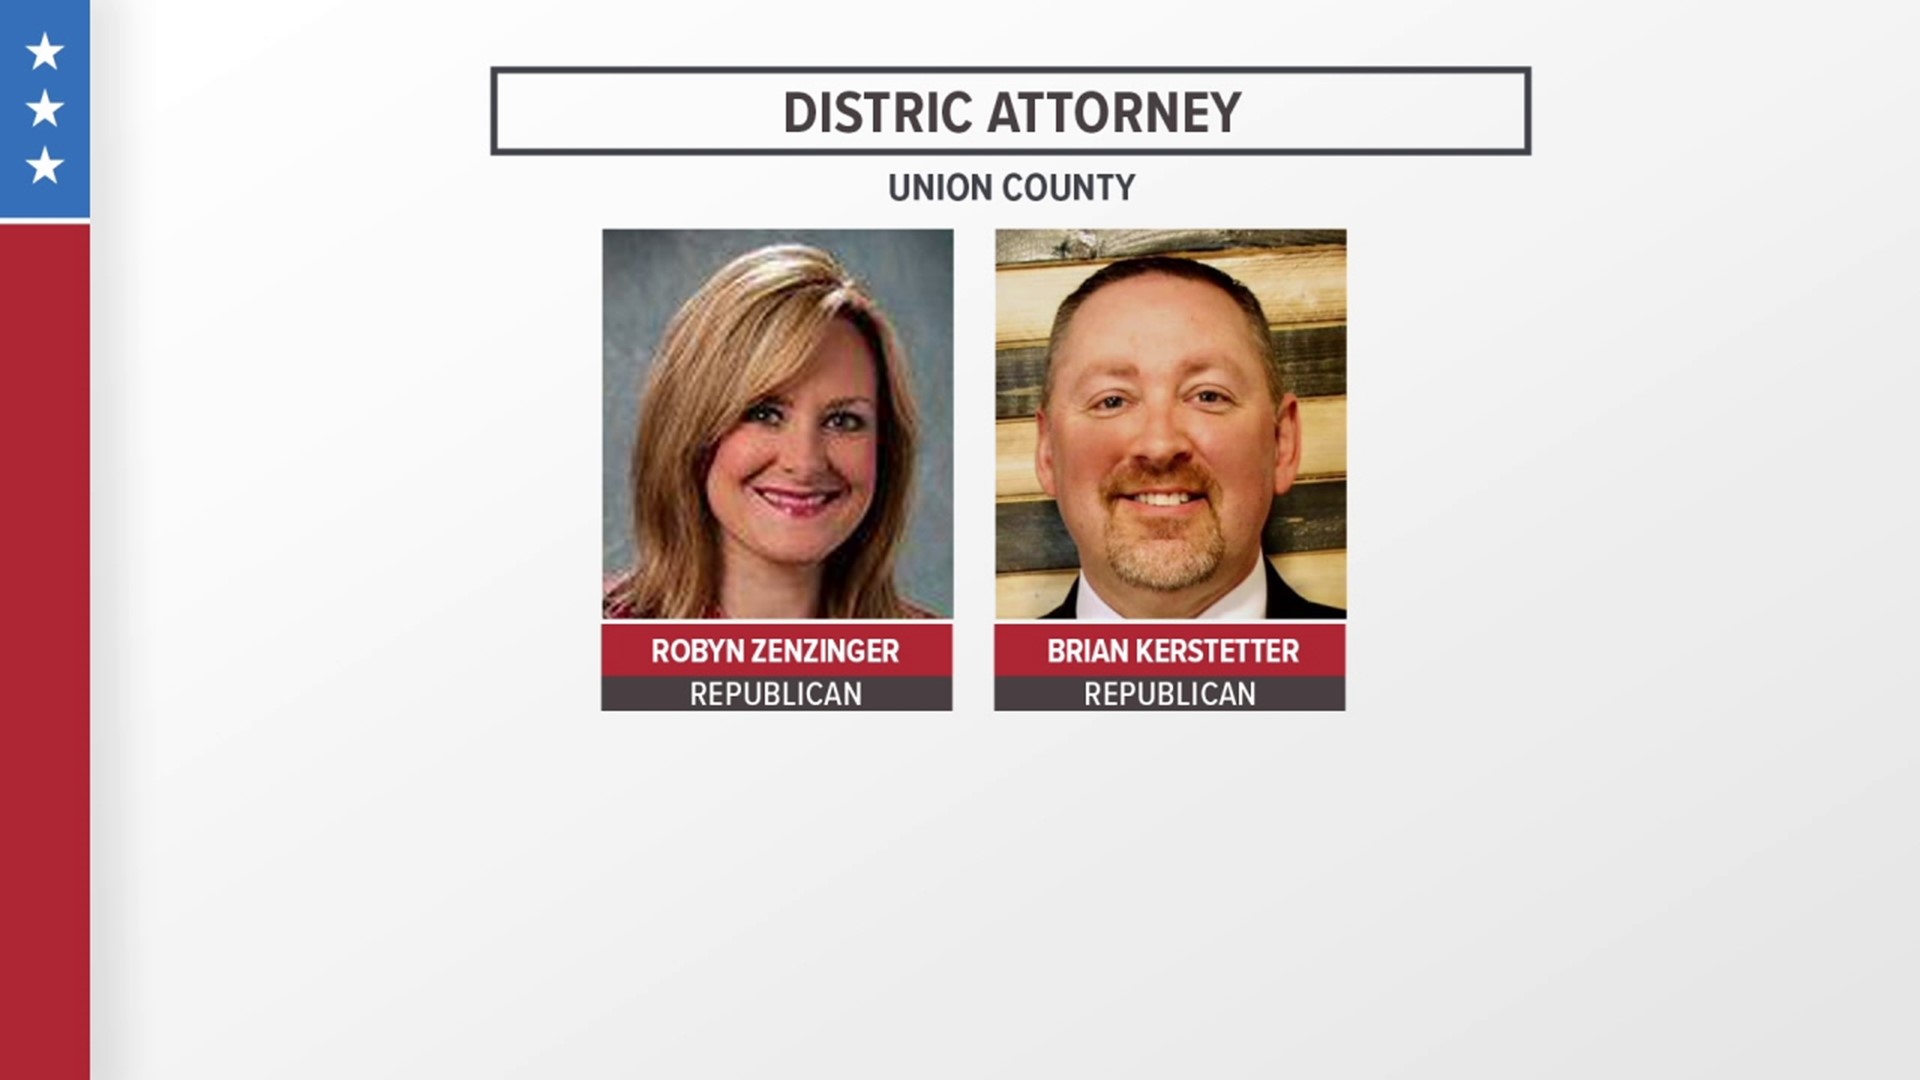 District Attorney Pete Johnson is retiring after seven terms, and Newswatch 16's Nikki Krize spoke with two candidates in the running to take his place.